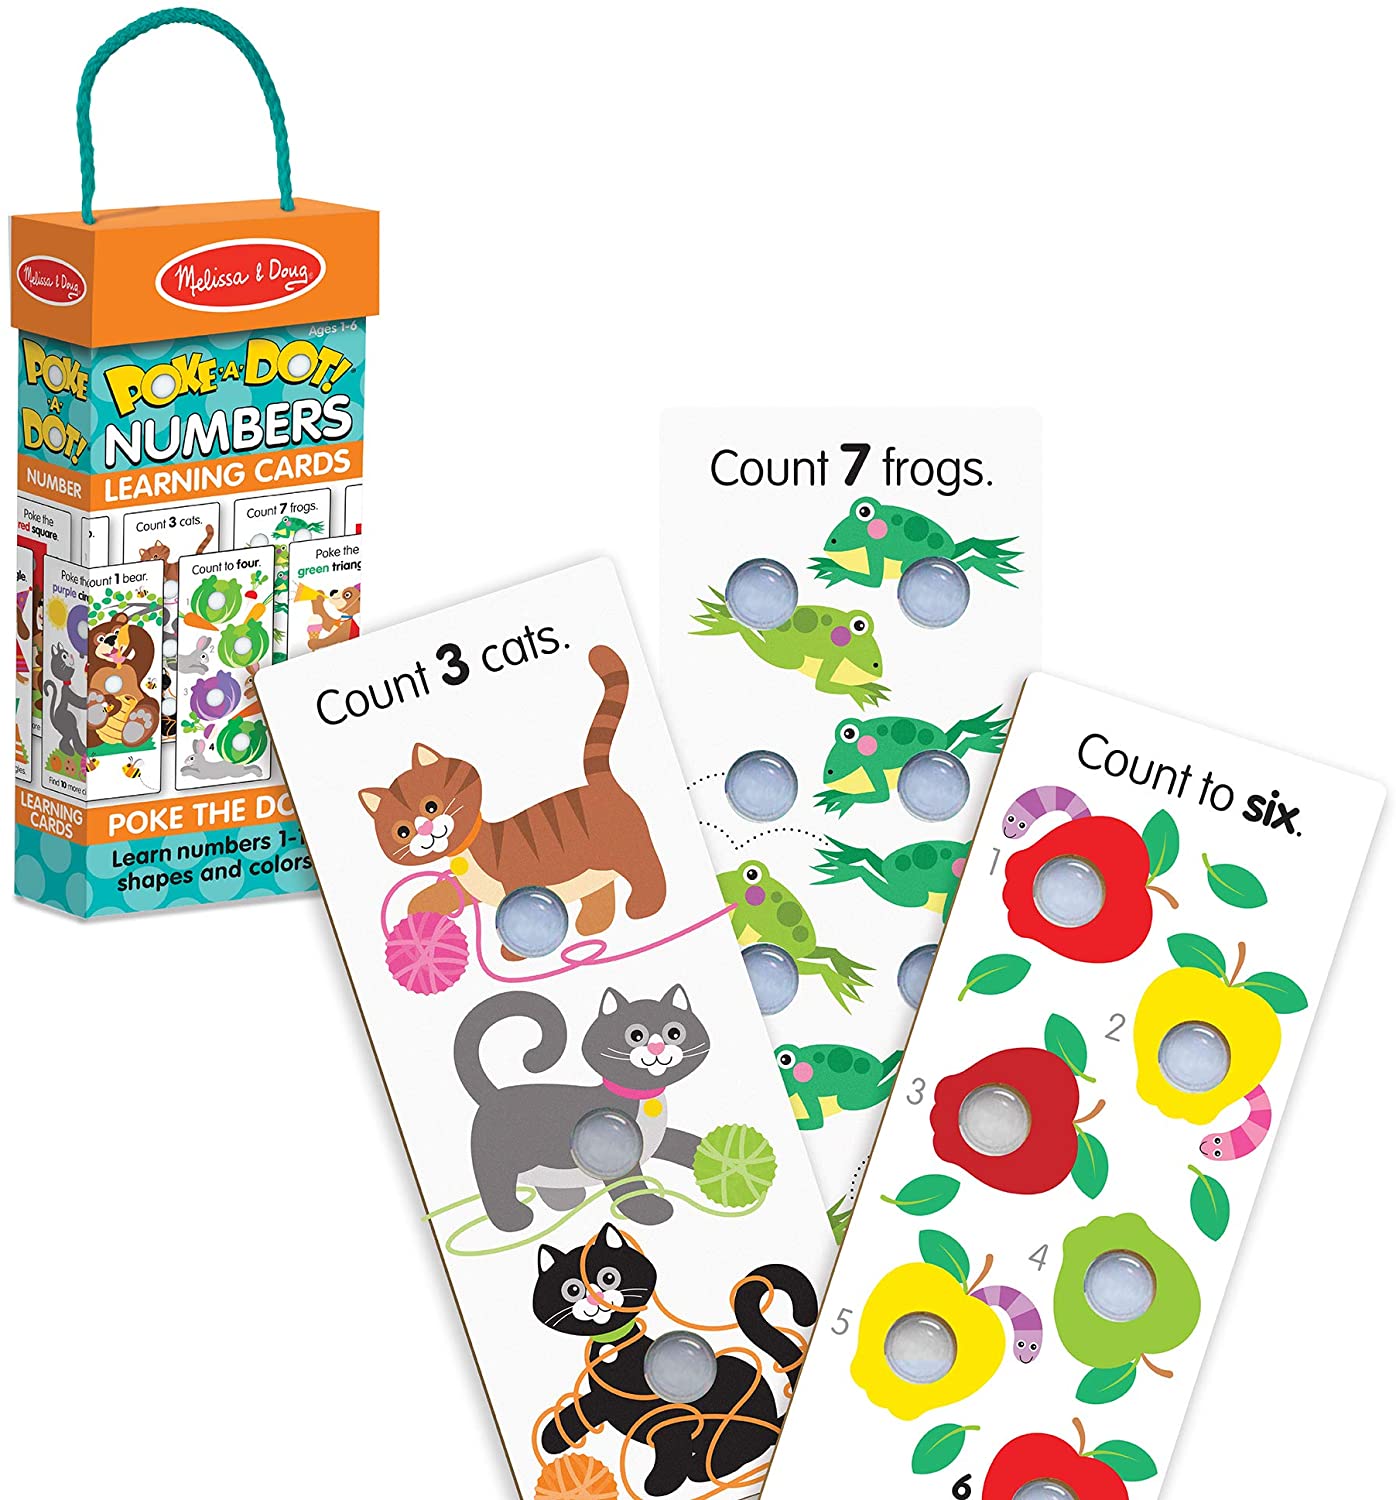 Activity Book-Poke-A-Dot: Goodnight Animals (Ages 3+)